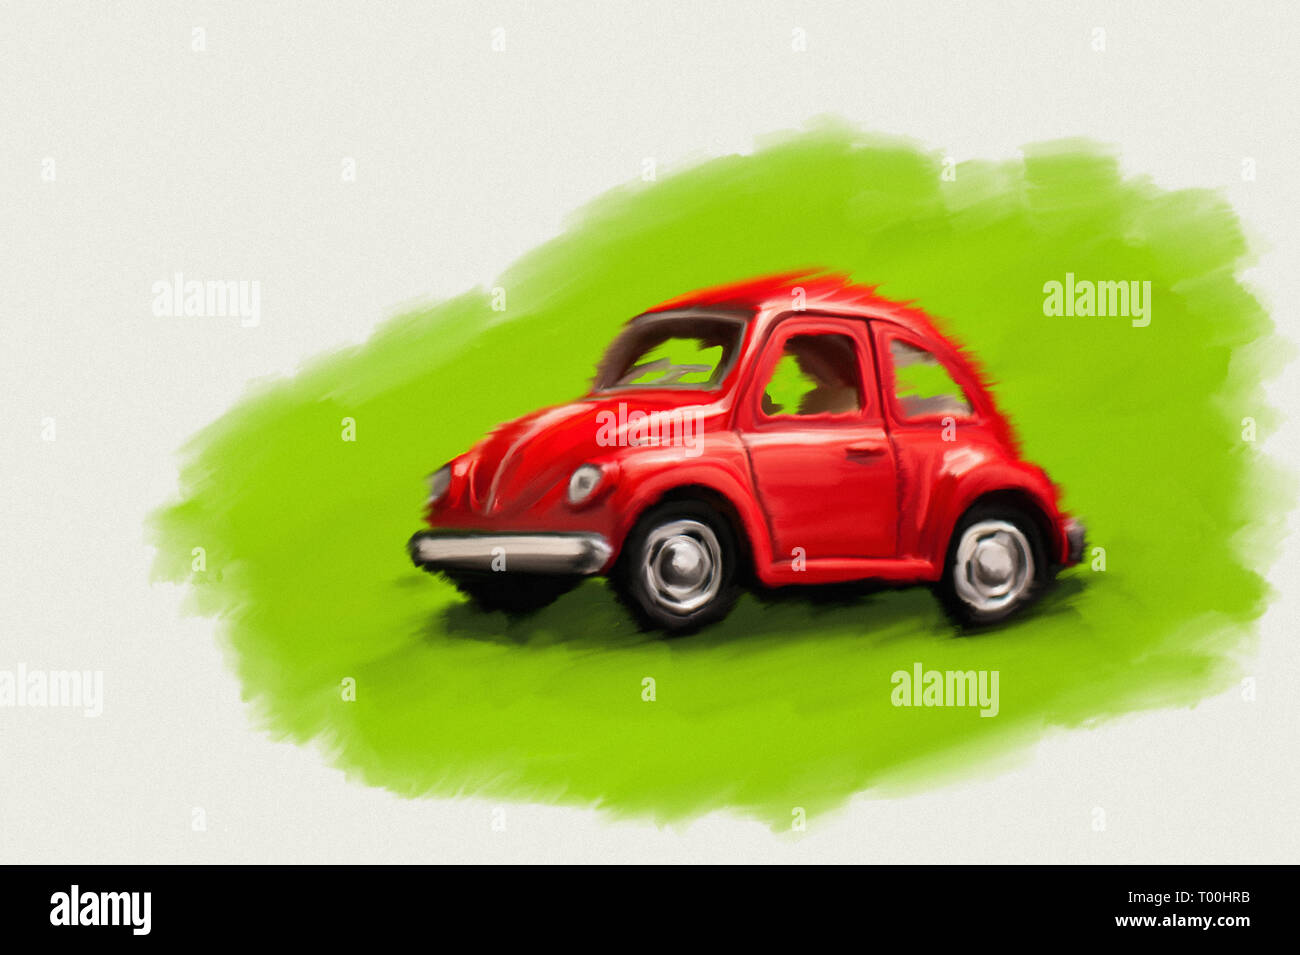 Red toy car illustration like oil paint on a white background. Stock Photo